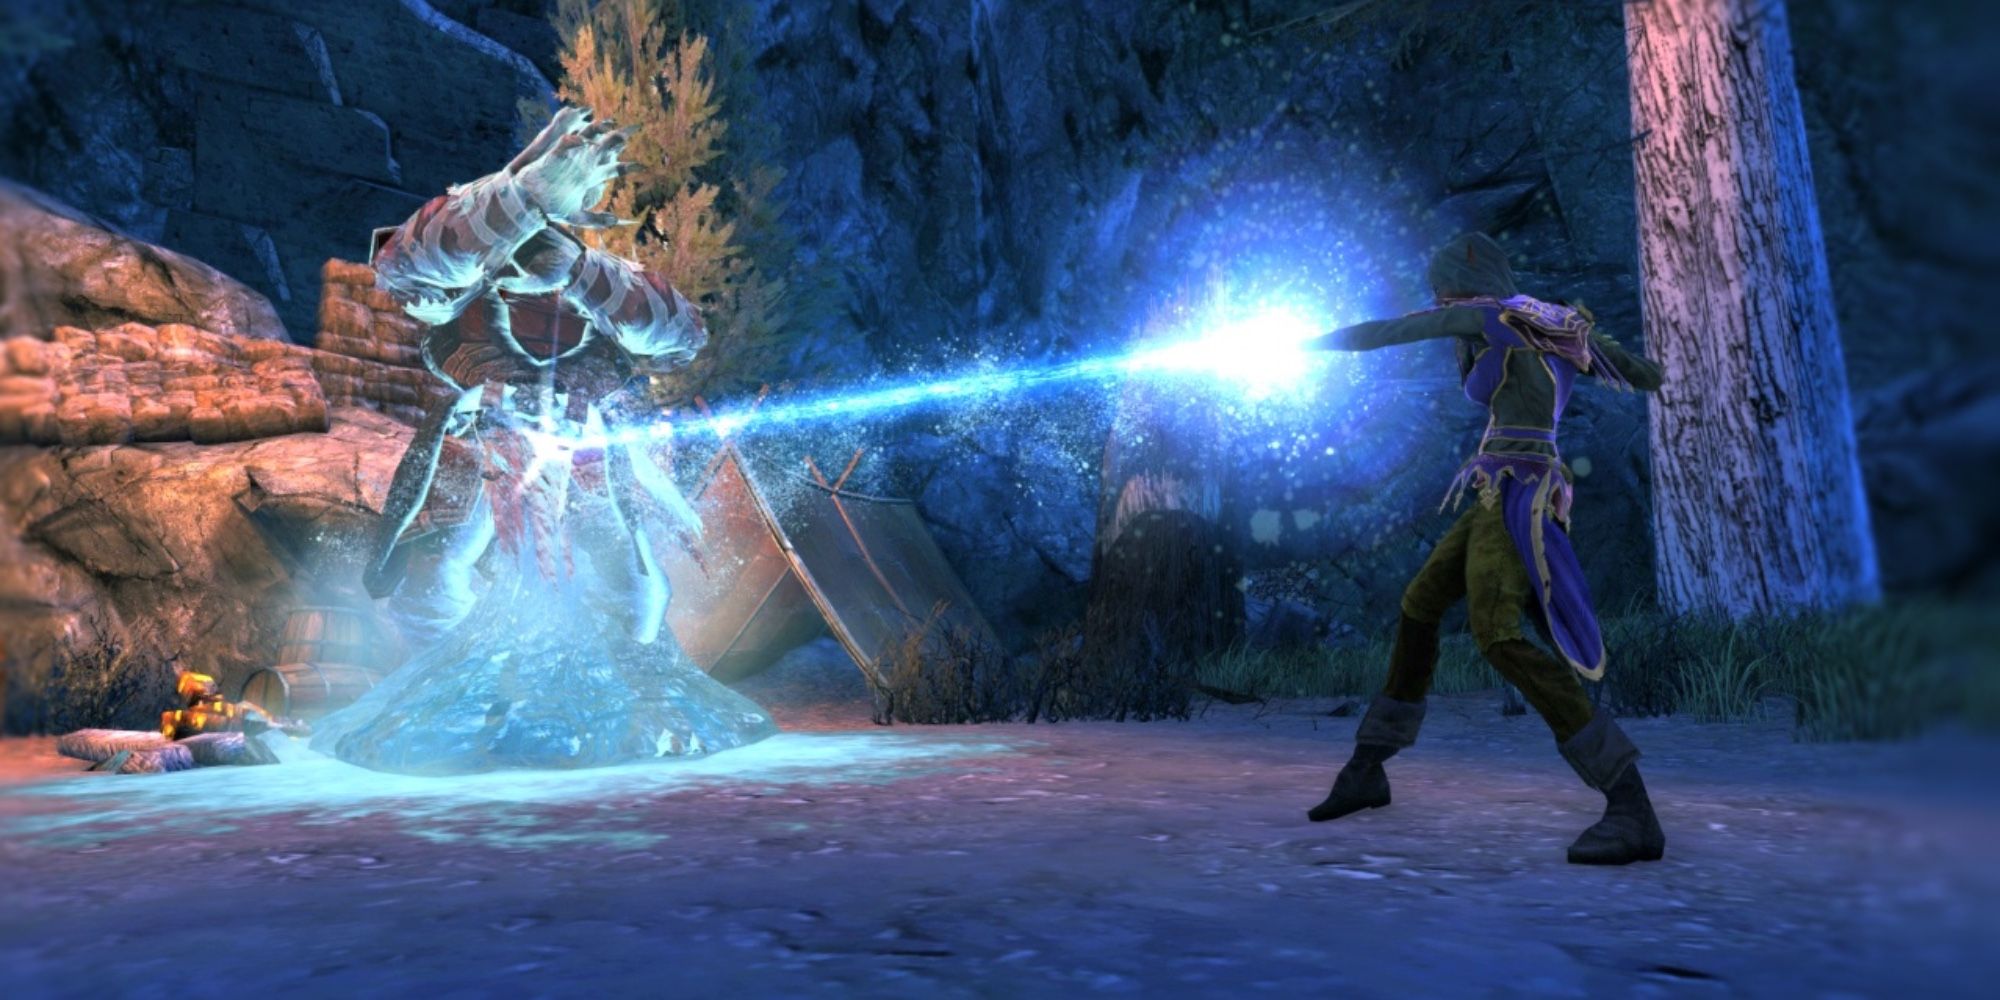 Free-to-play RPGs on Steam - Neverwinter - Player using ice blast on enemy